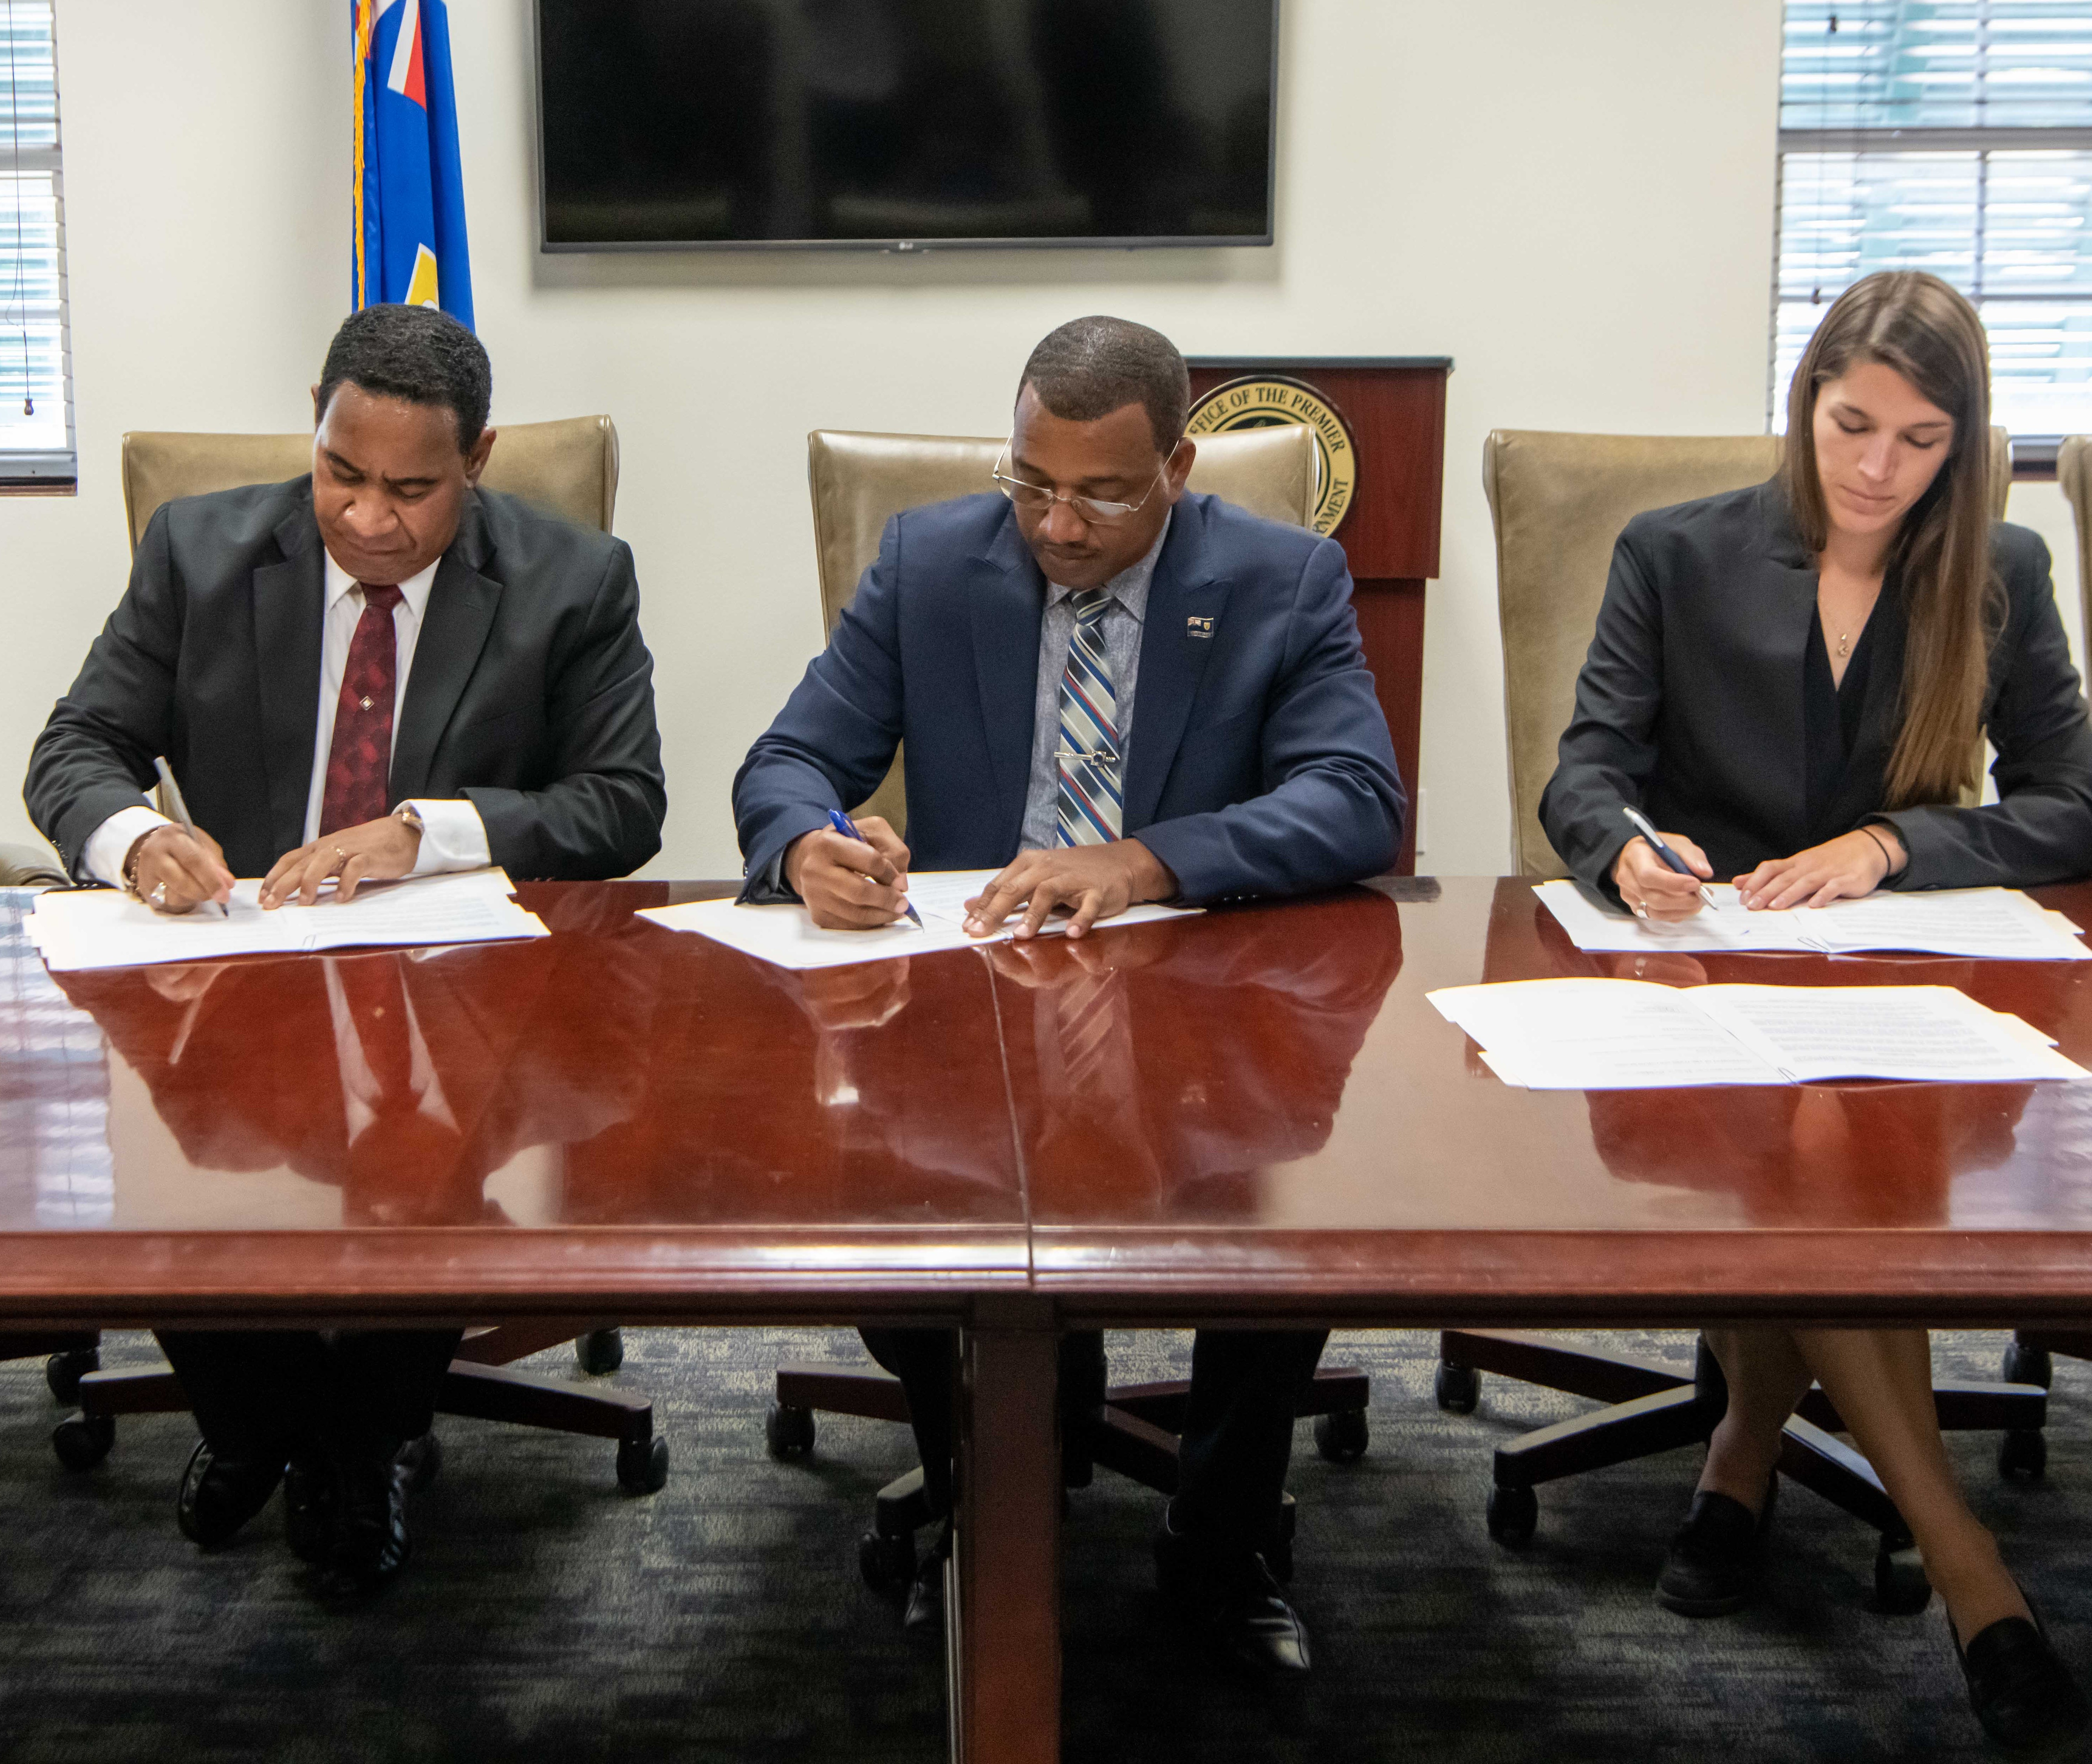 Turks and Caicos Islands to gain greater renewable energy integration under new partnership with FortisTCI and Clinton Foundation